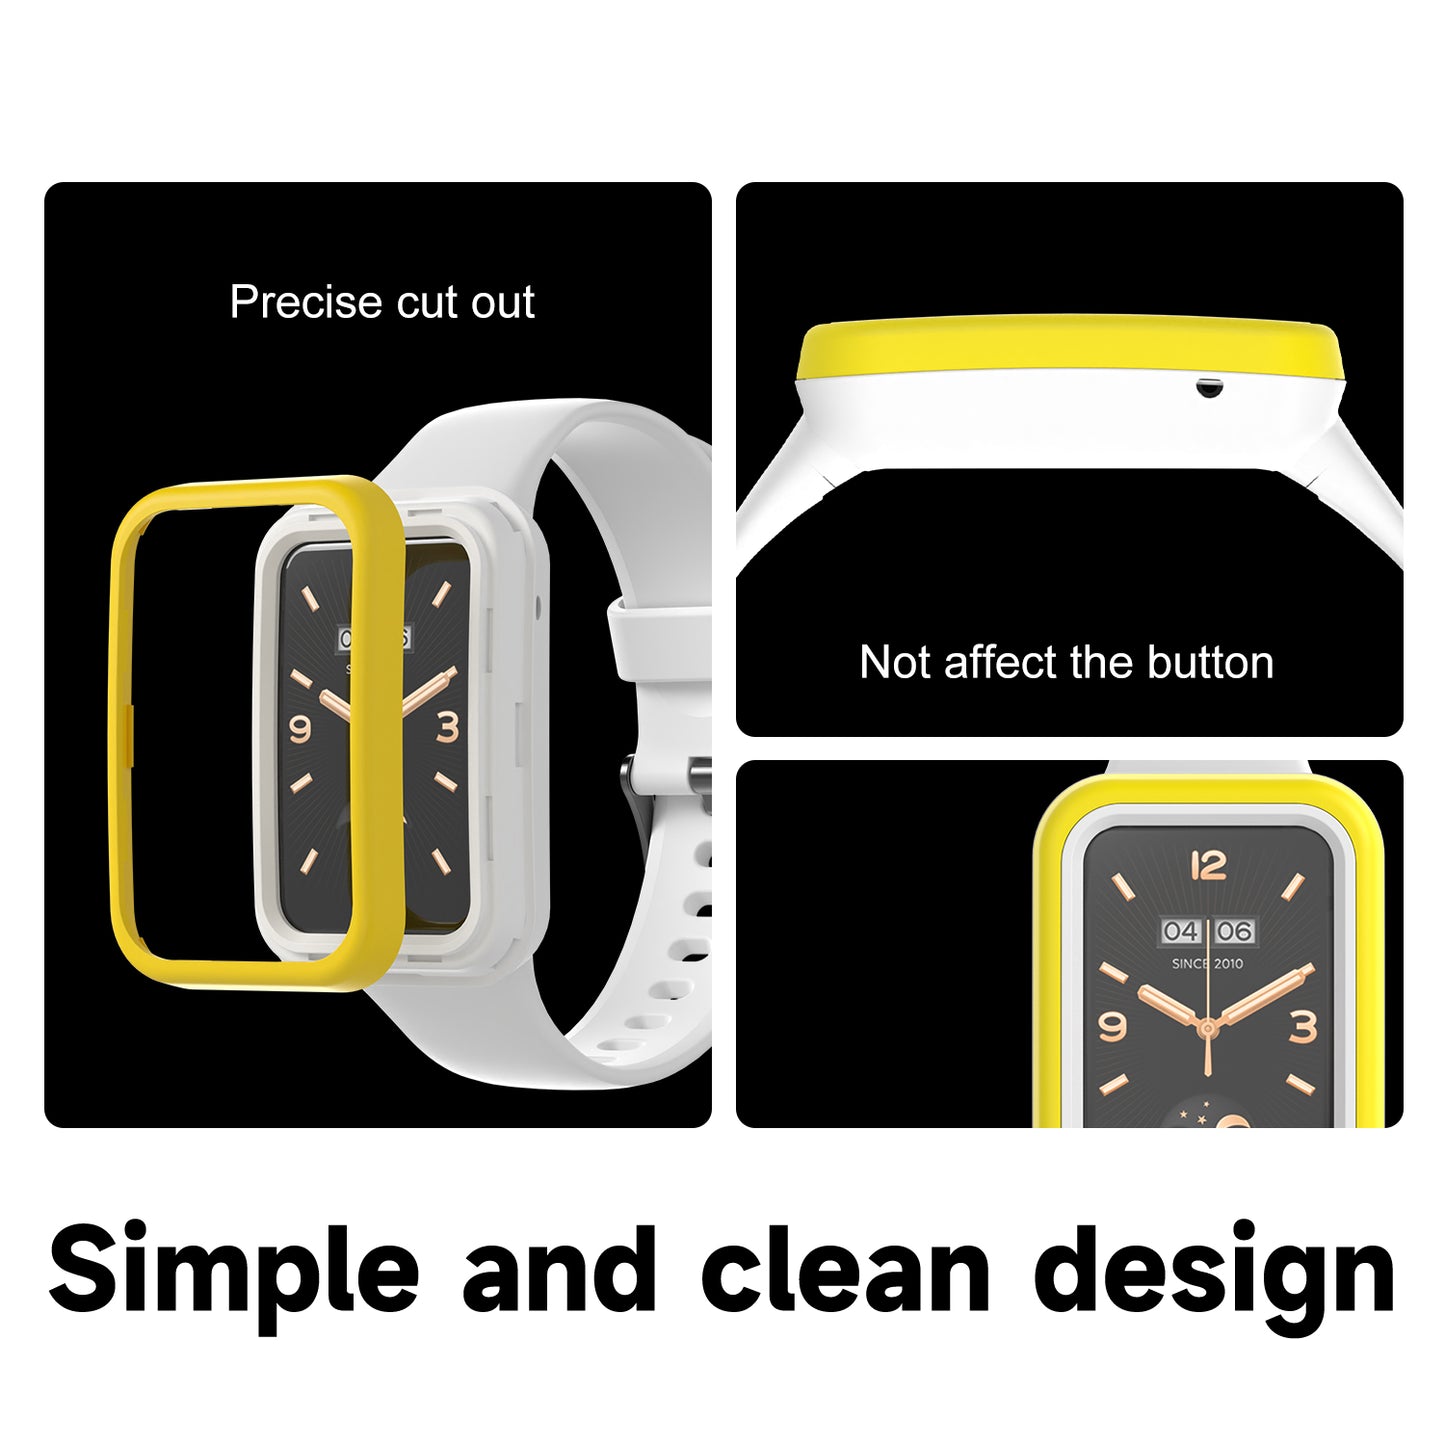 Silicon Case Strap for Xiaomi Mi Band 7 pro Replacement Wristband Bracelet for Mi Band 7Pro Smart Watch Accessories